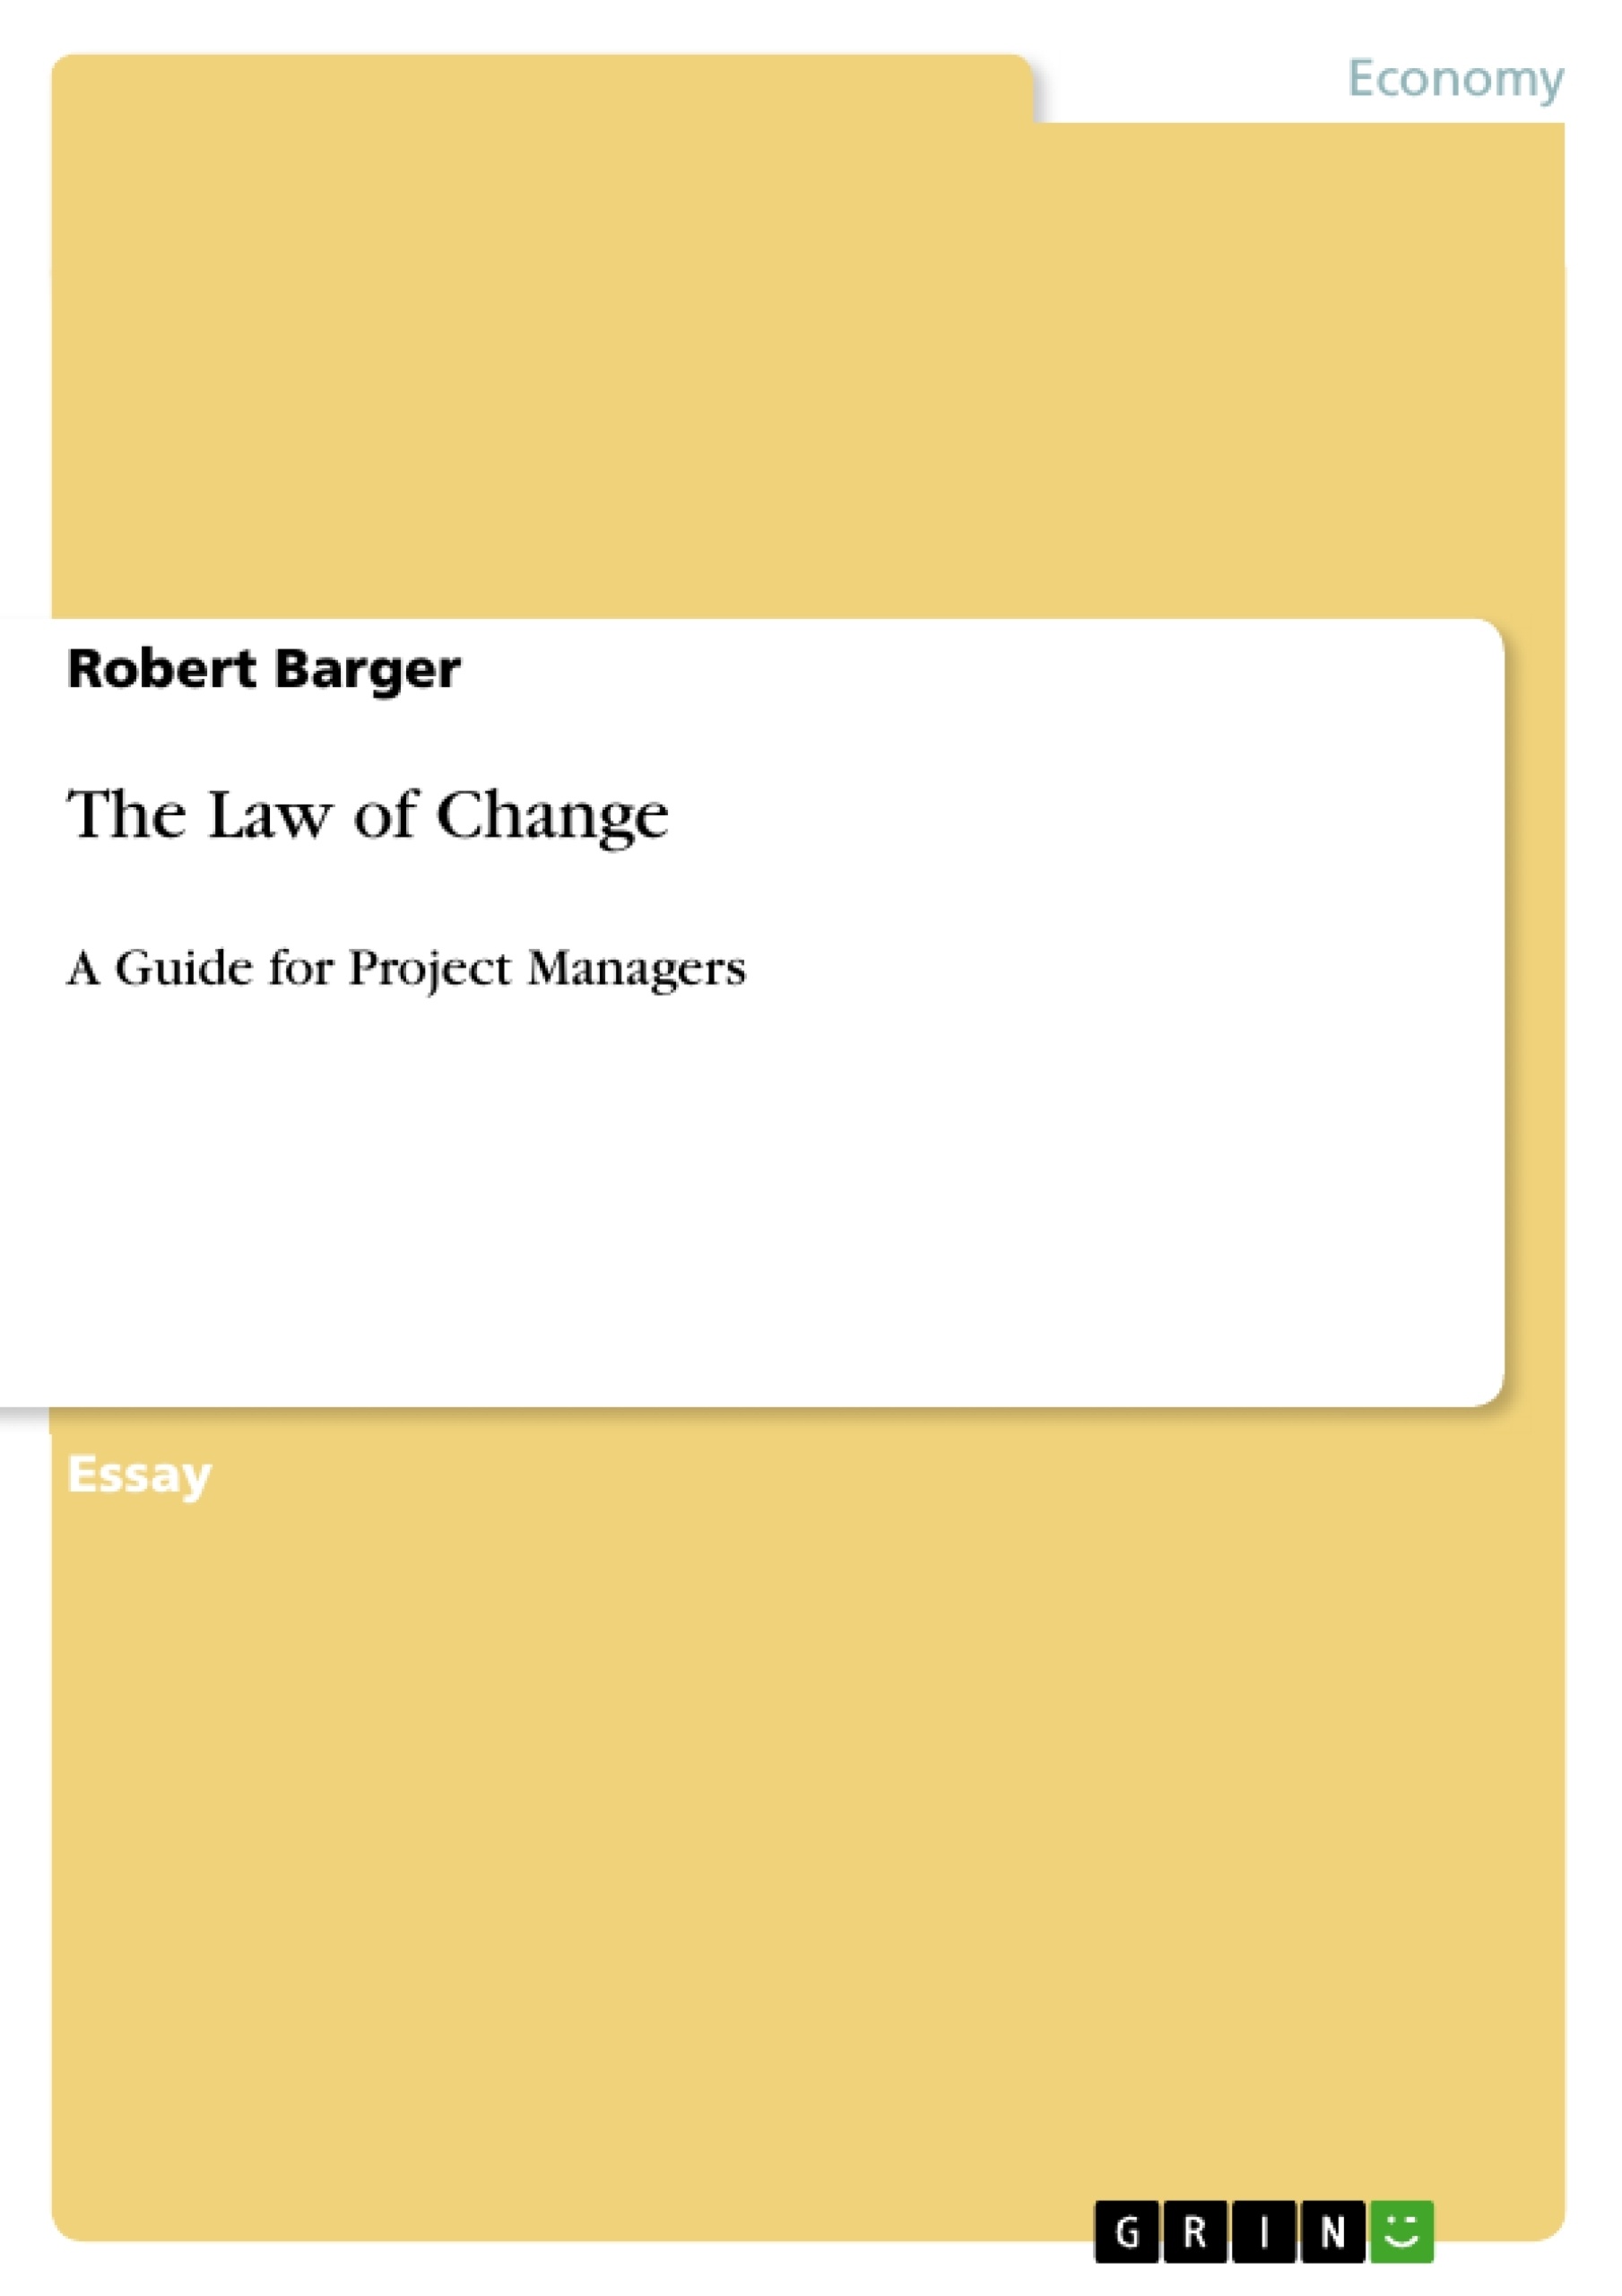 Title: The Law of Change